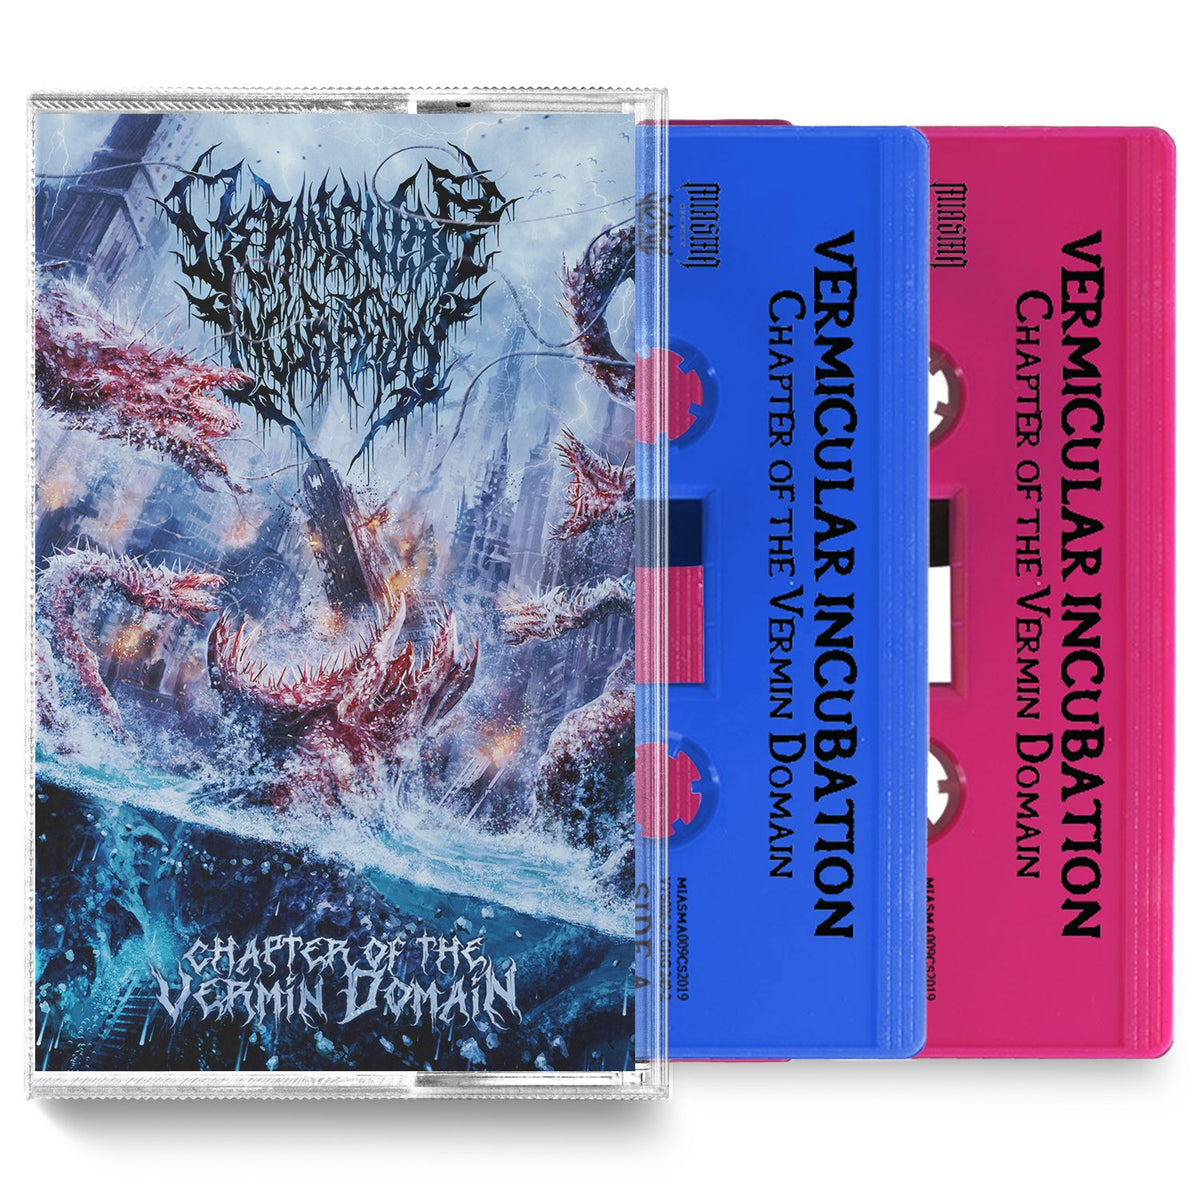 Vermicular Incubation "Chapter of the Vermin Domain" Cassette - Miasma Records